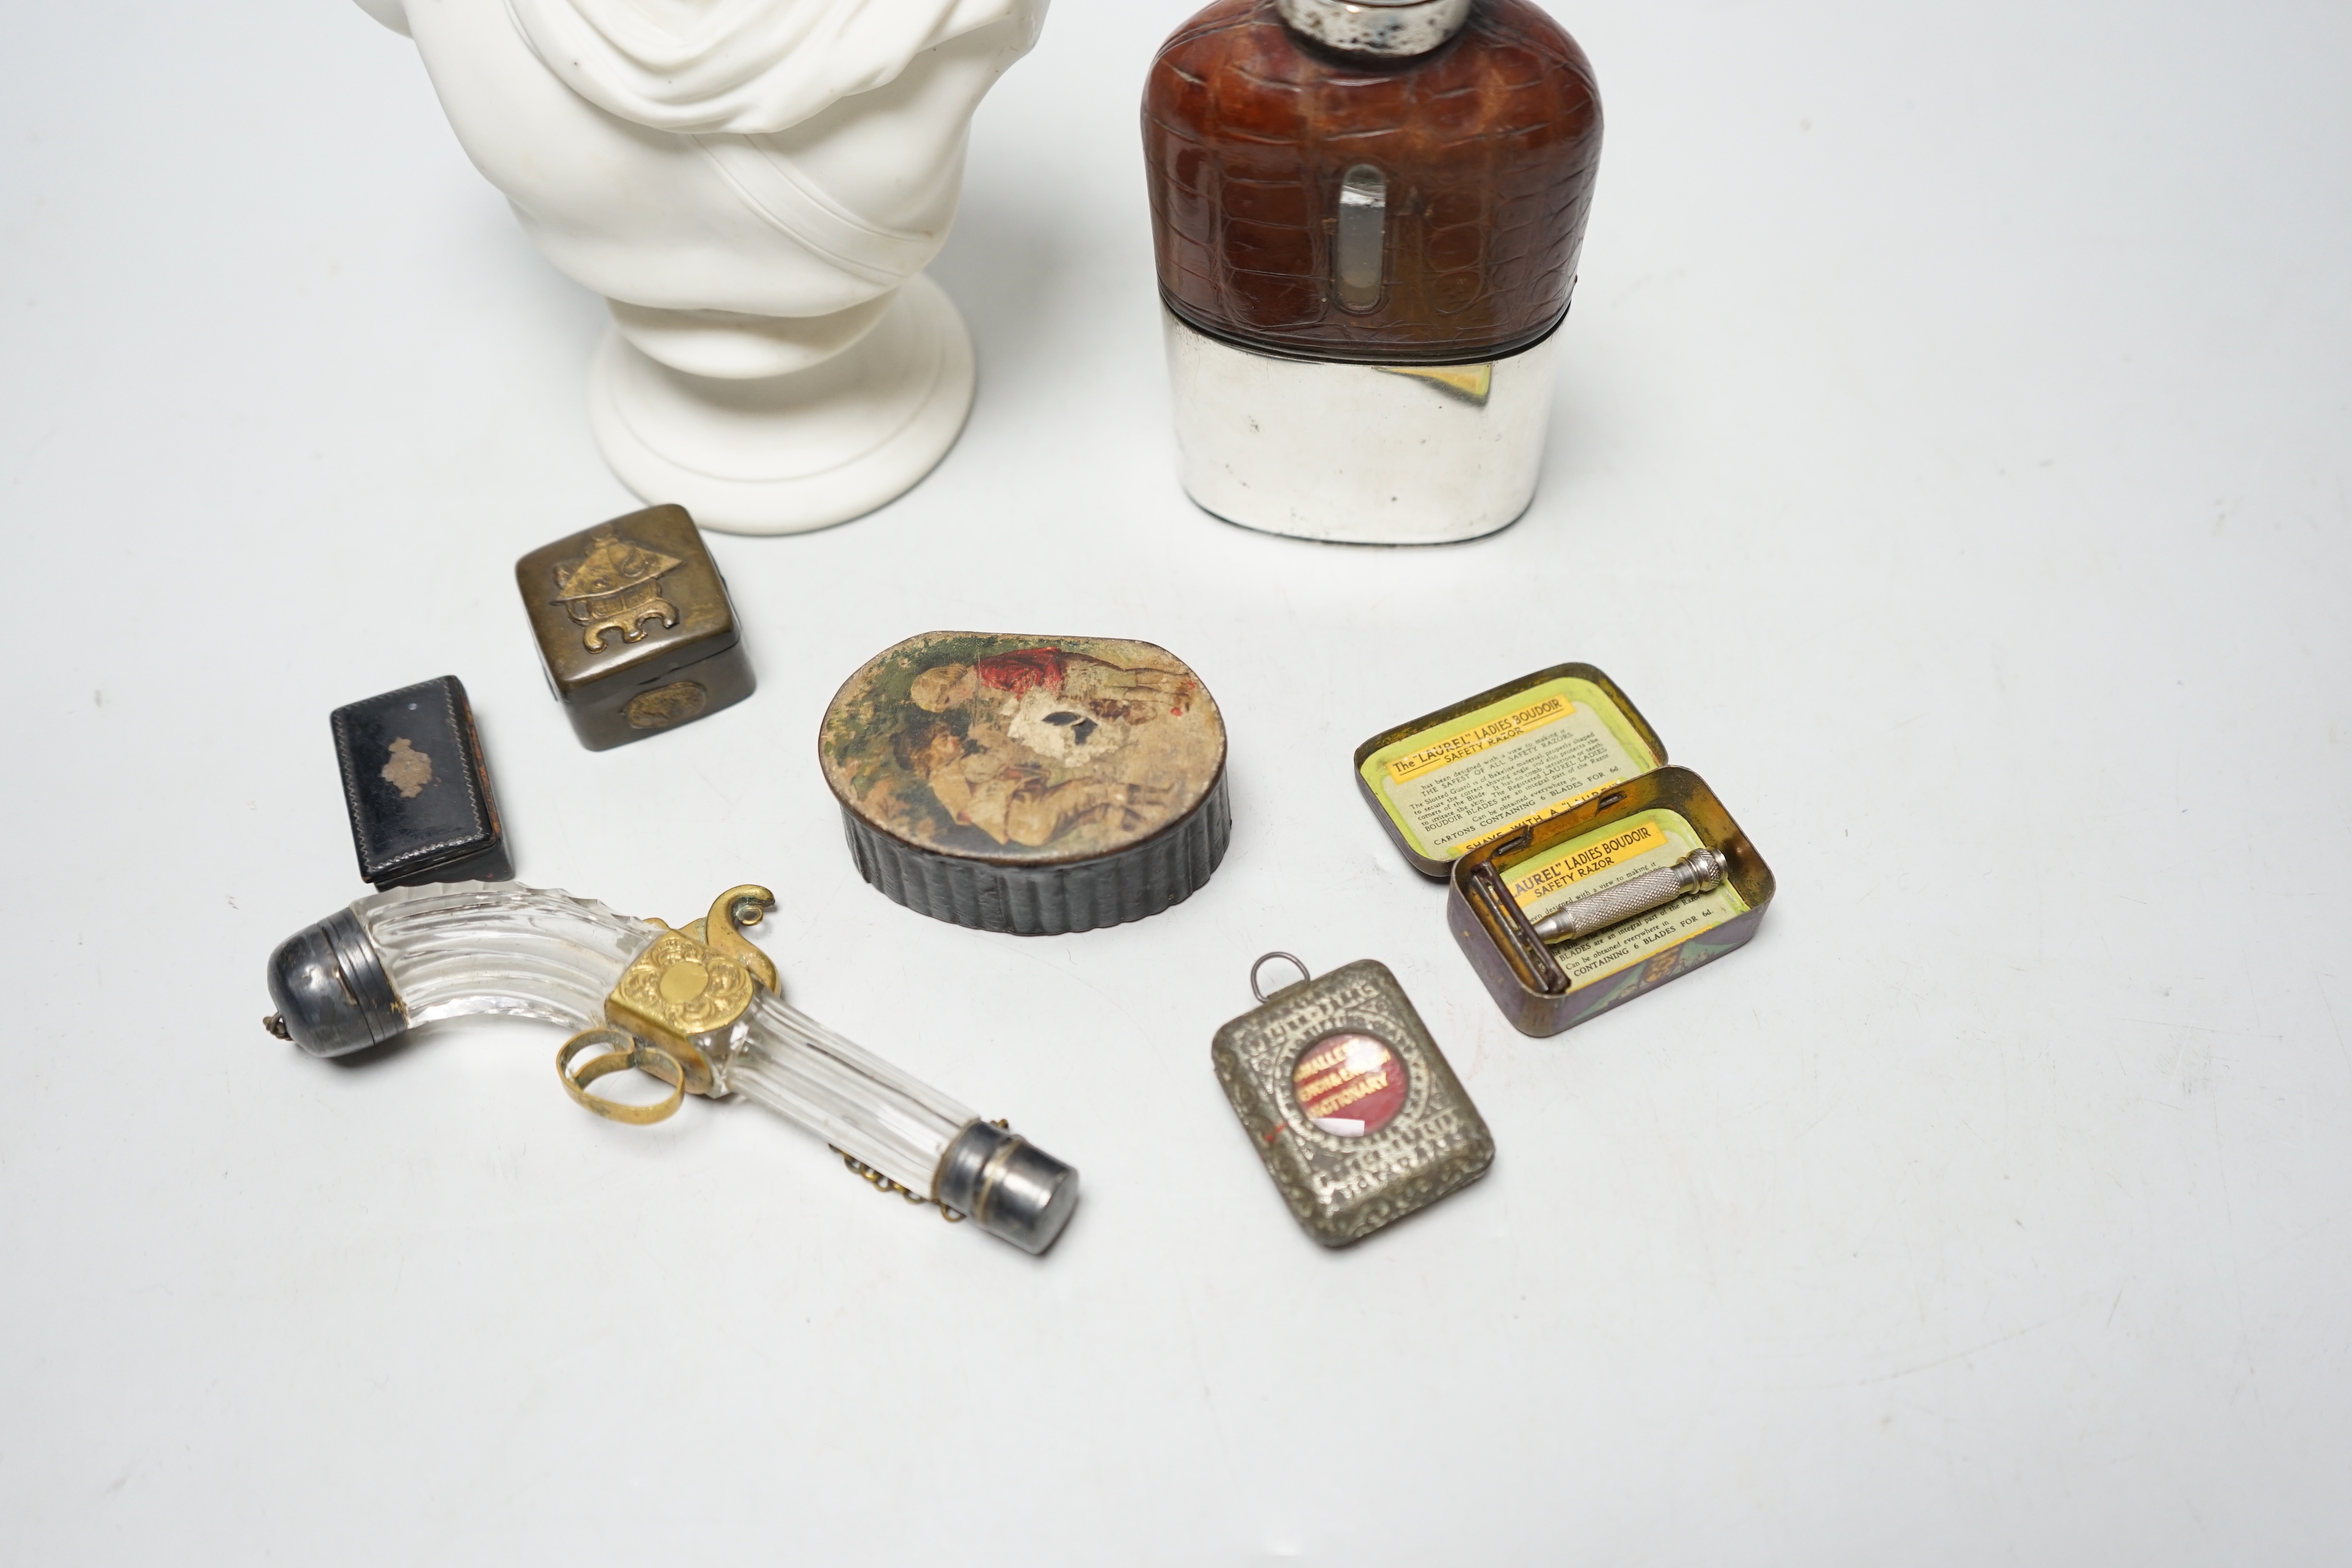 Eight items of objets d'art, including Parian bust, miniature French and English Dictionary in a - Image 2 of 4